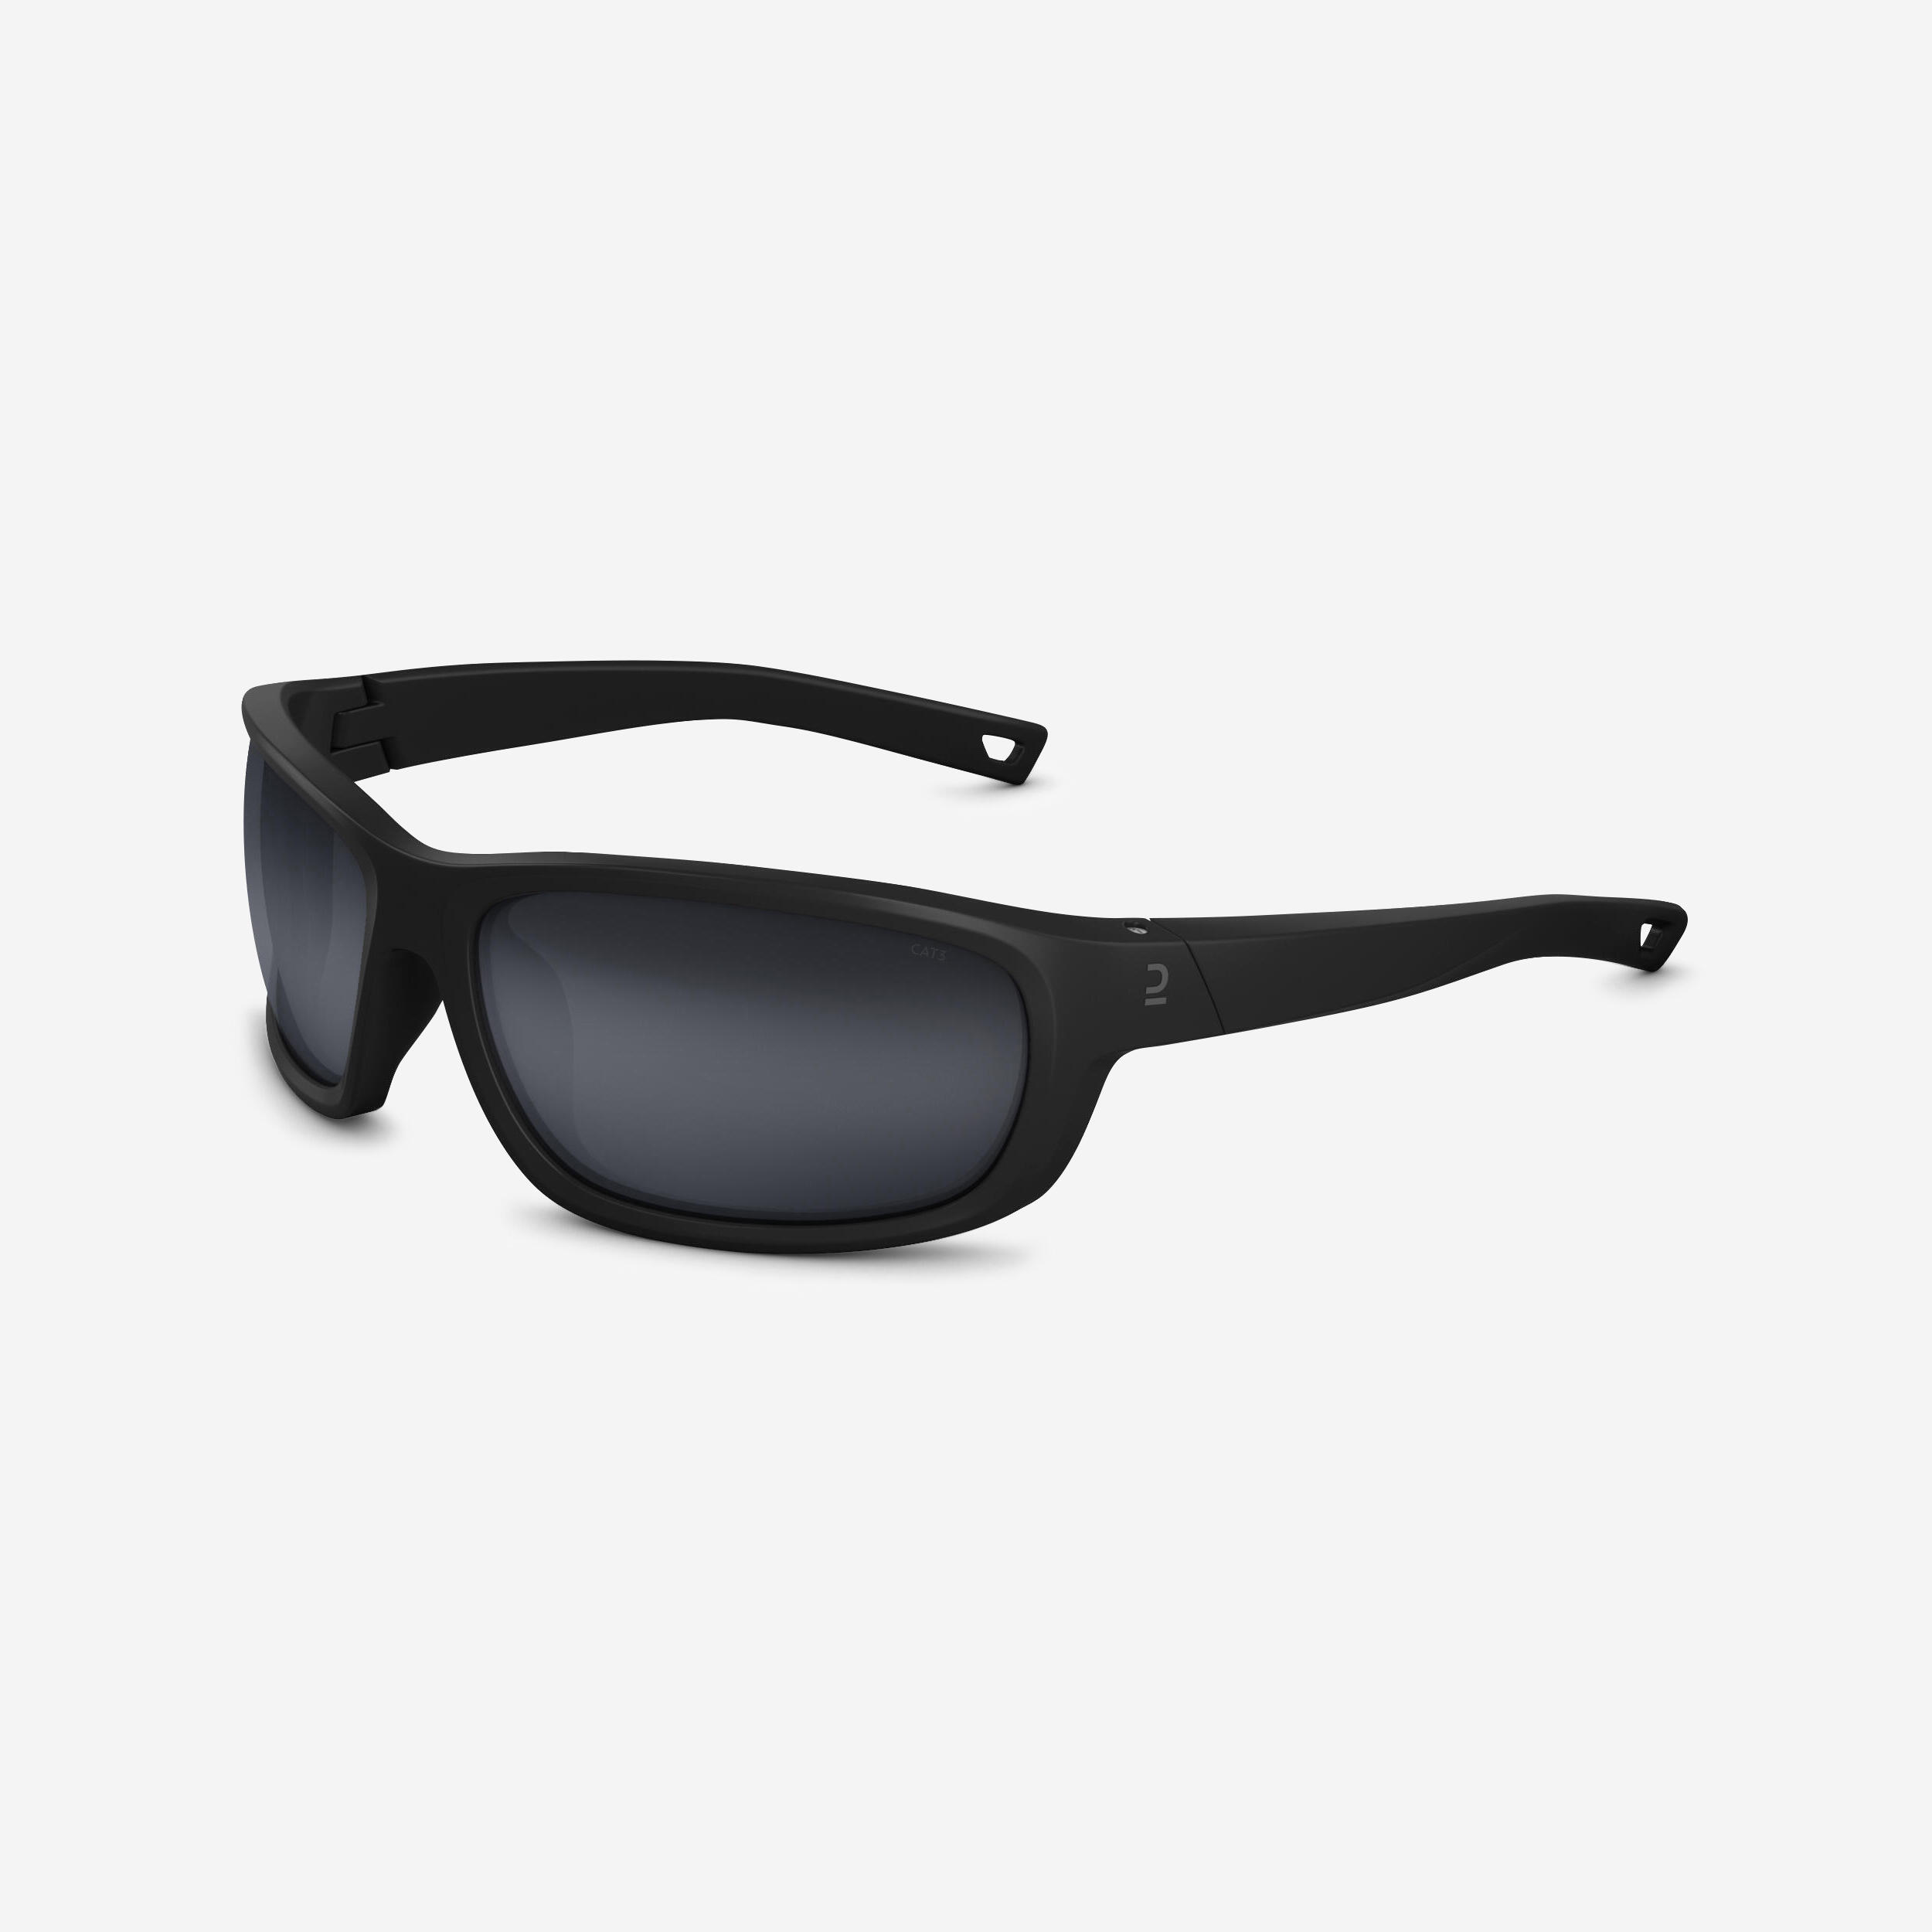 Adults' Hiking Sunglasses MH500 - Category 3 1/11